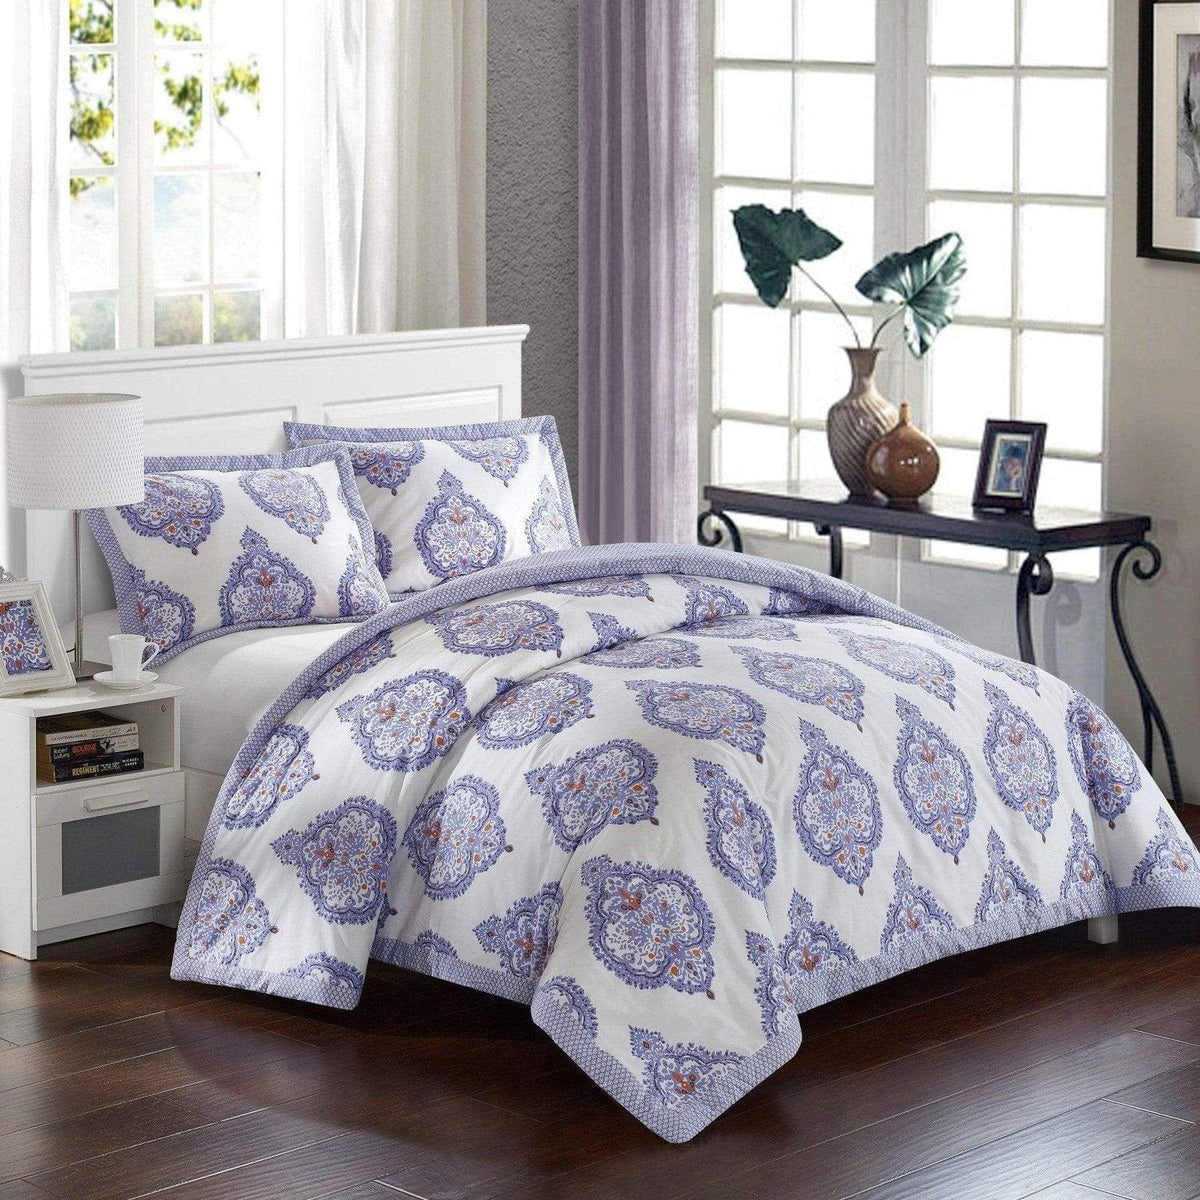 Chic Home Grand Palace 3 Piece 100% Cotton Duvet Cover Set Reversible Global Inspired Print Lavender Twin XL